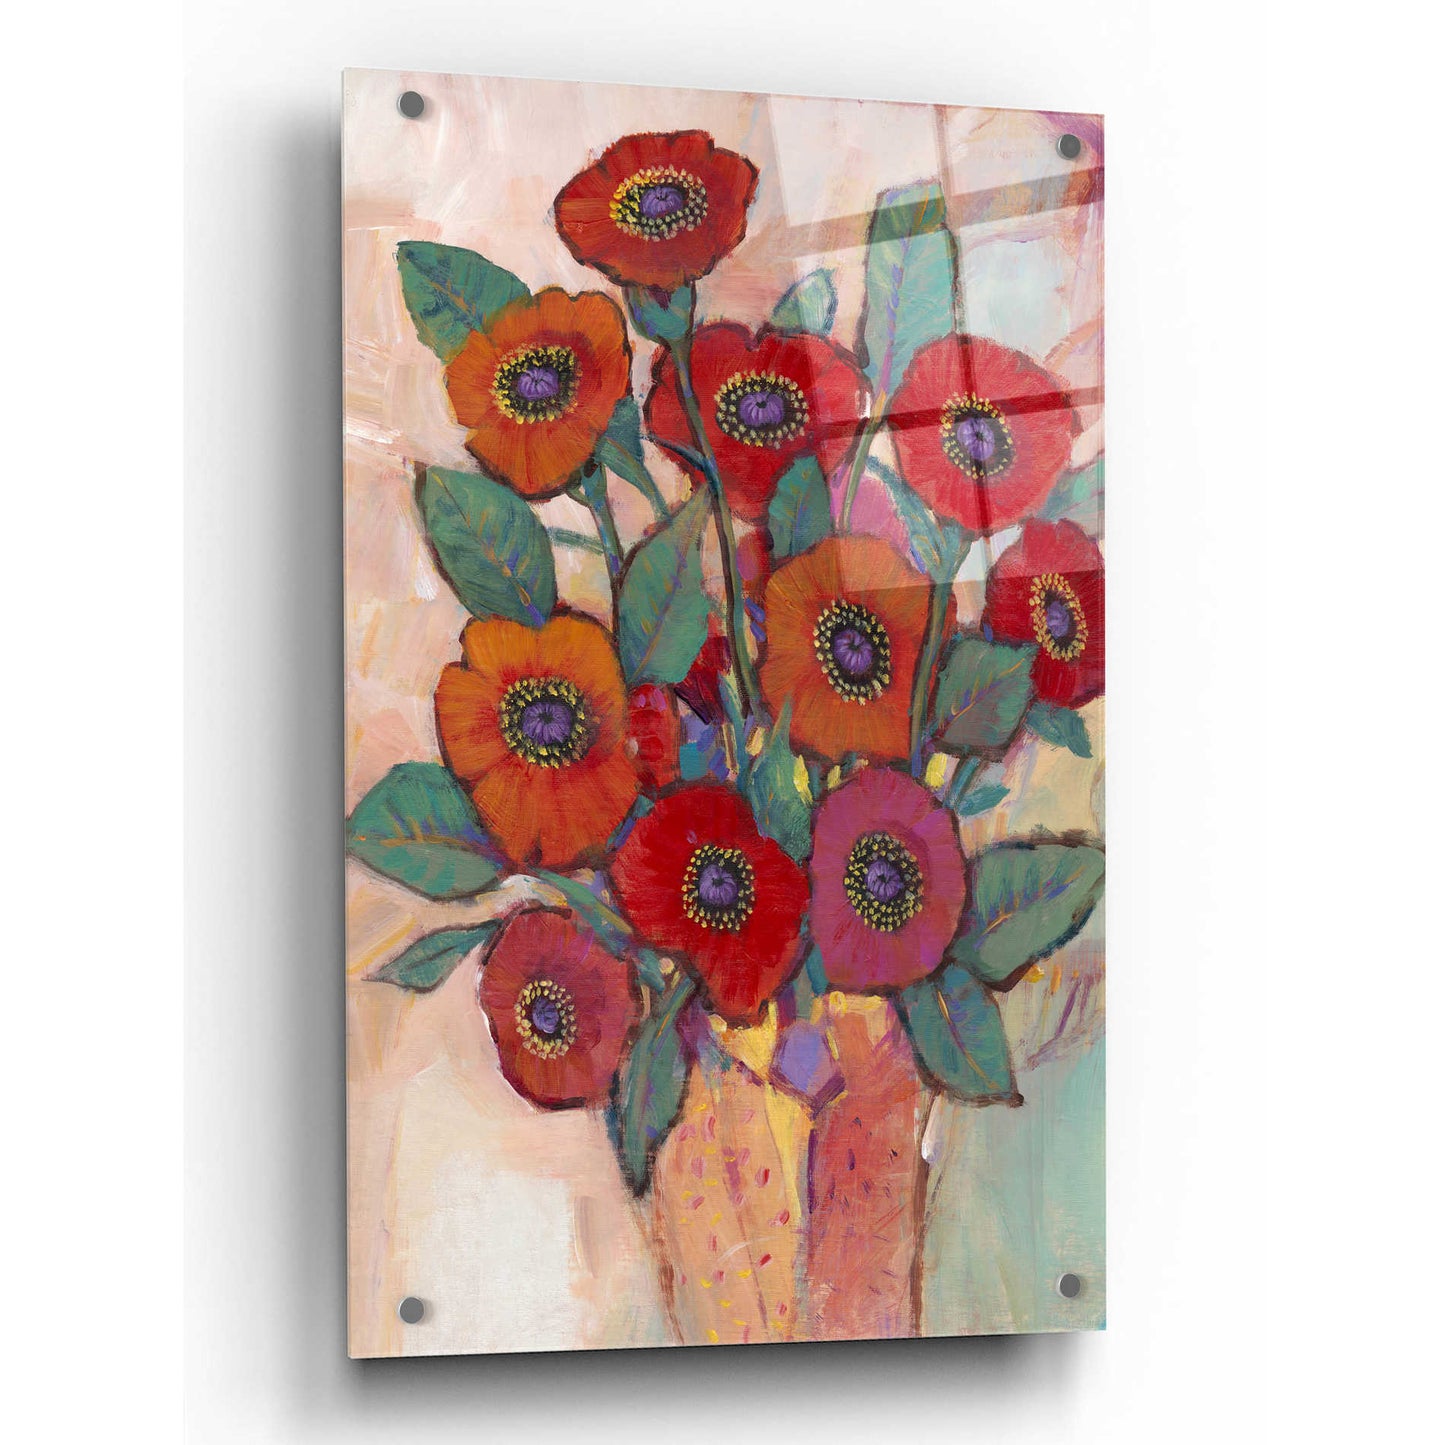 Epic Art 'Poppies in a Vase II' by Tim O'Toole, Acrylic Glass Wall Art,24x36